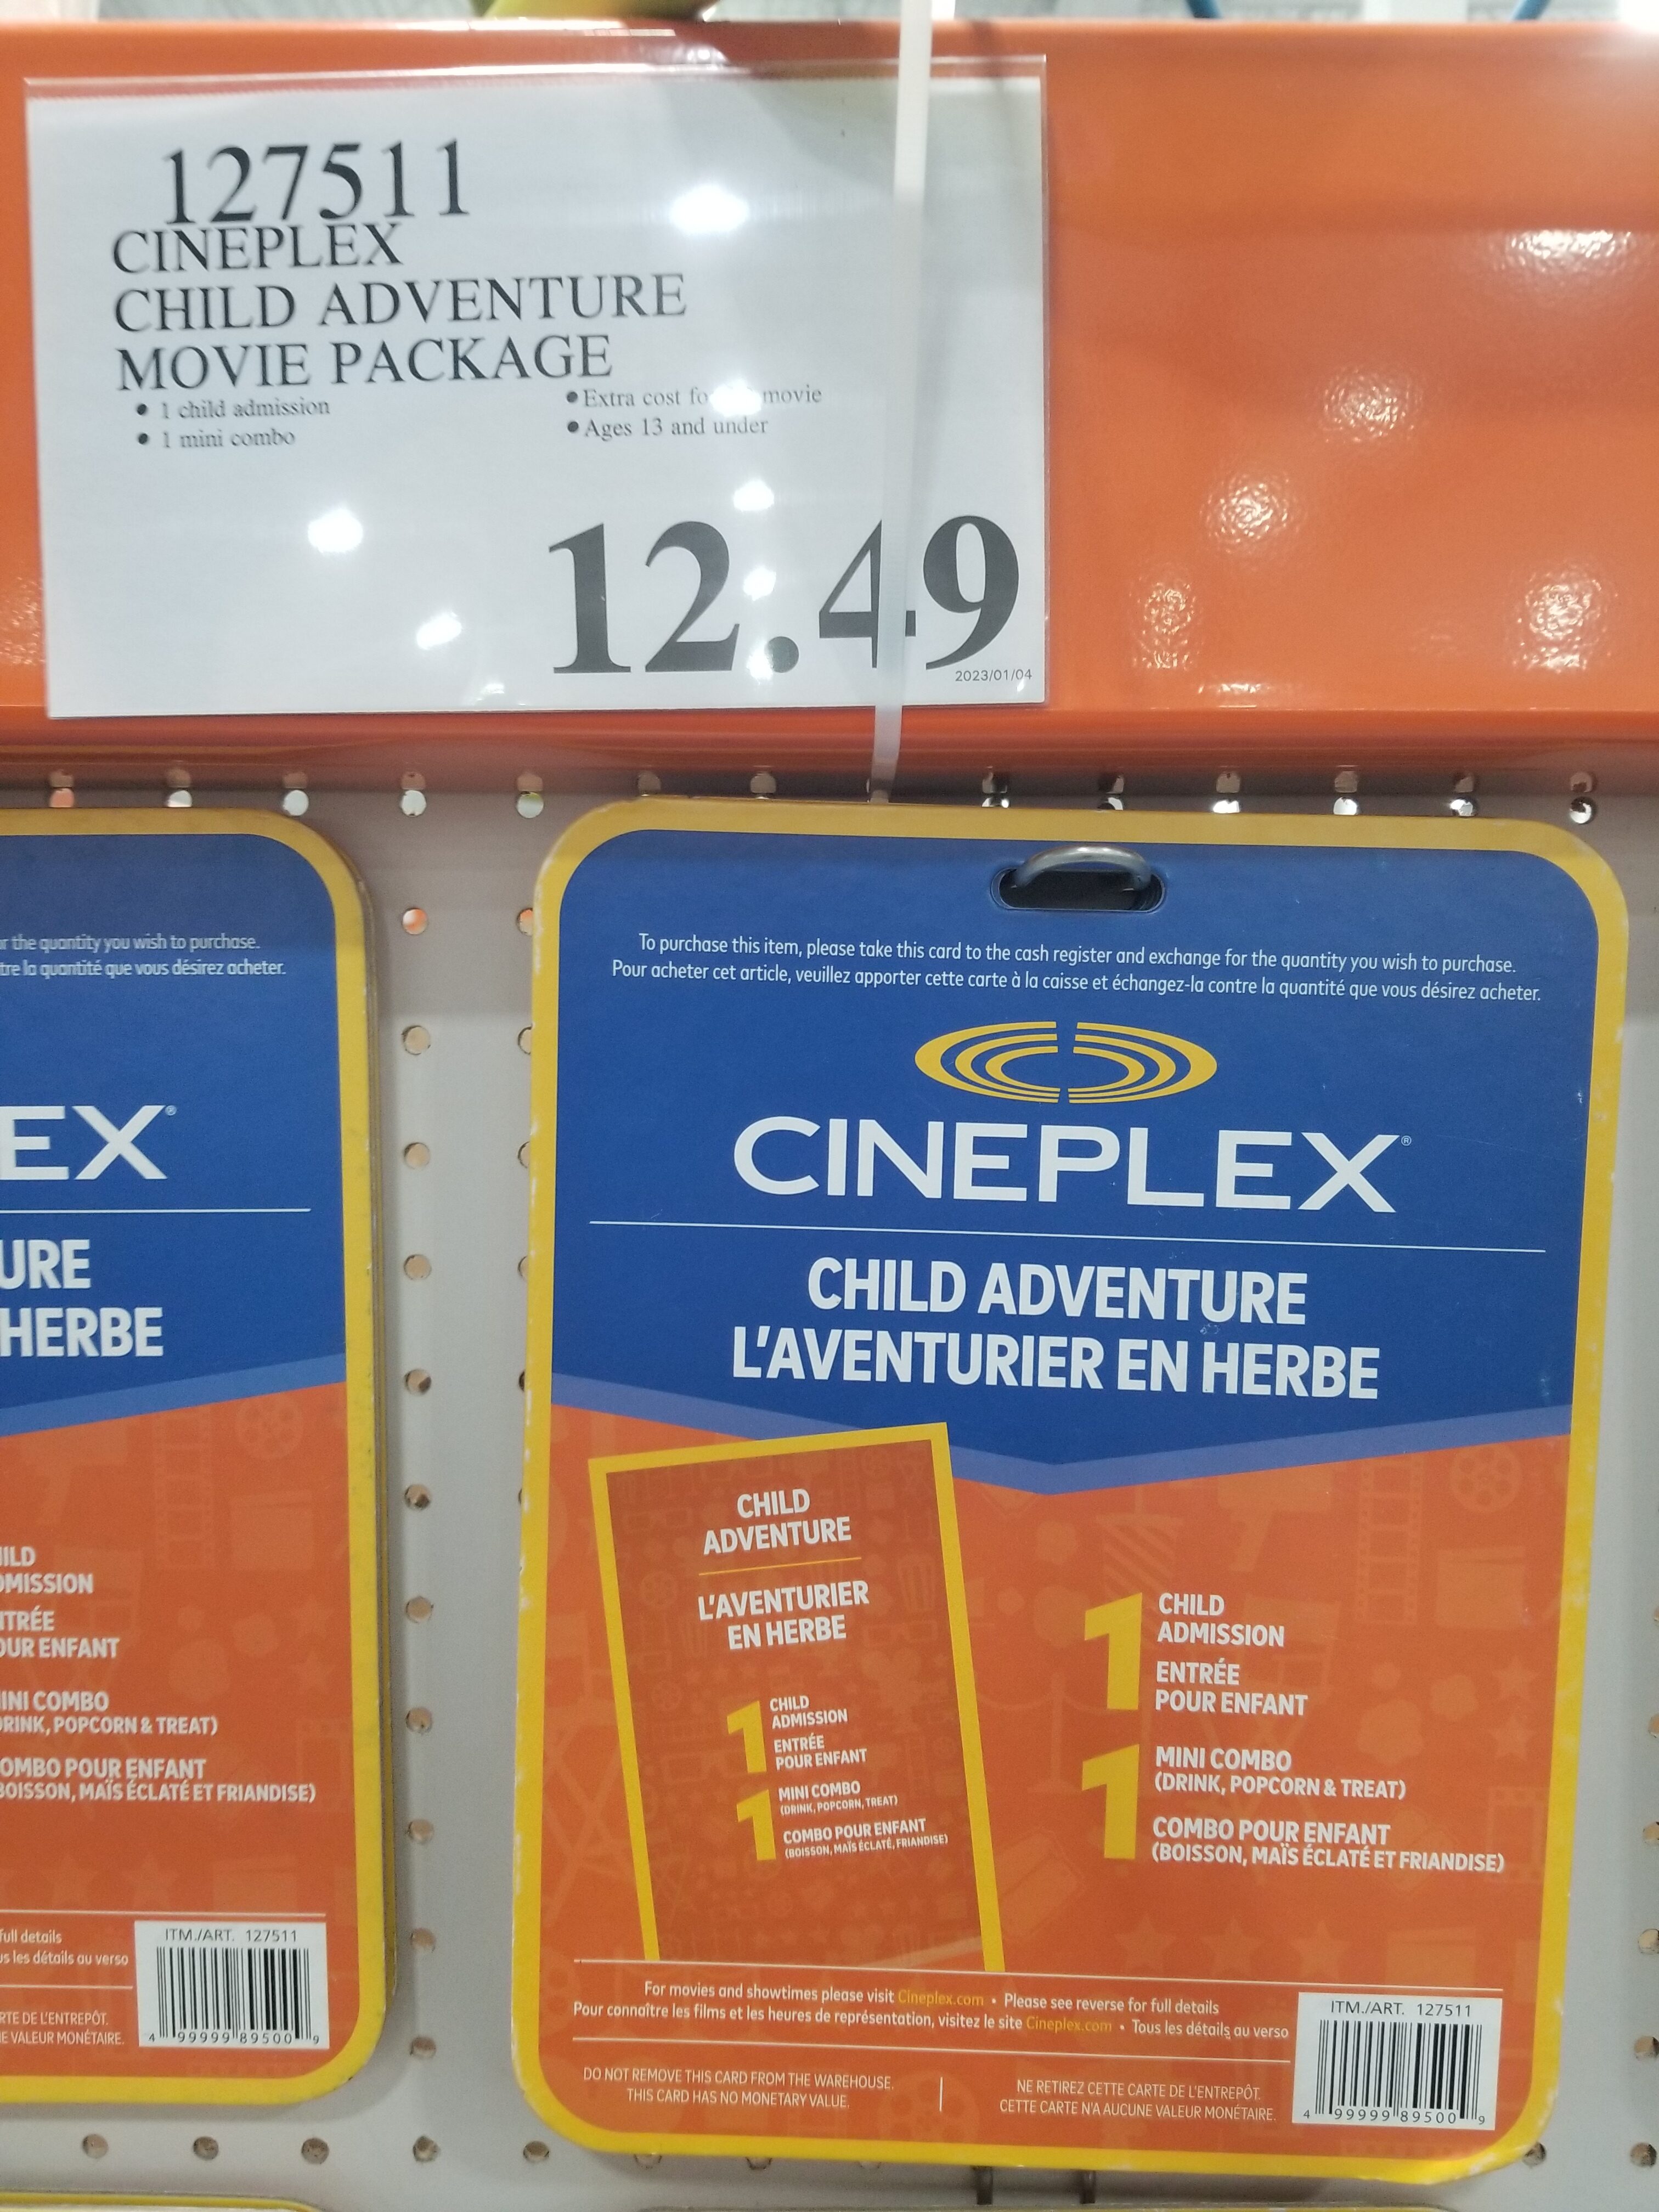 Buy $30 Cineplex gift card and get free $30 coupon pack